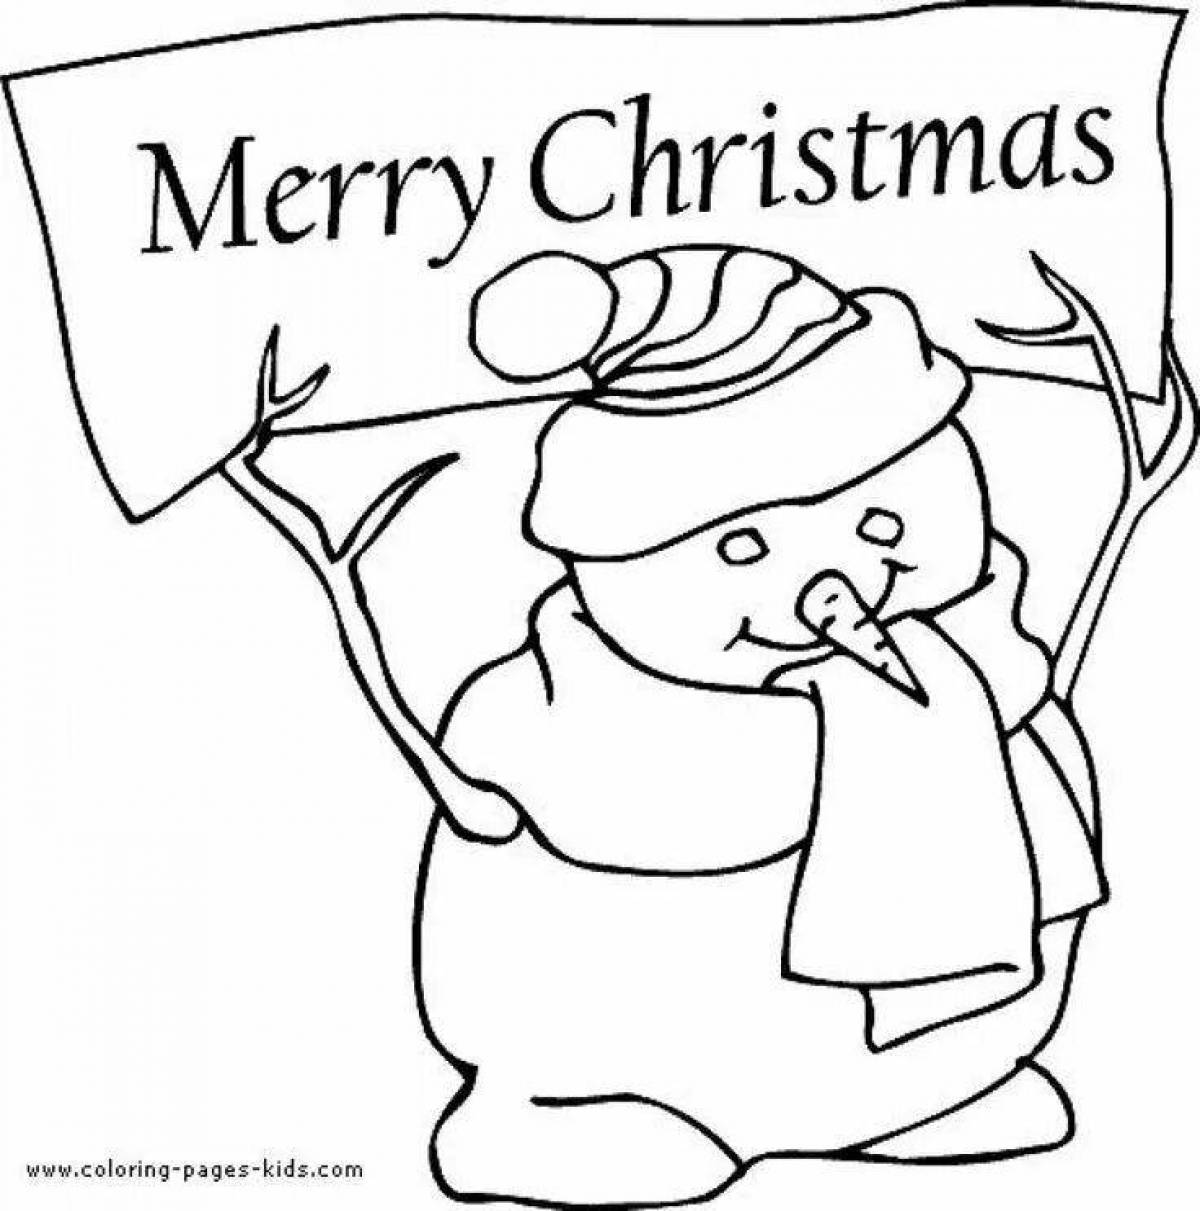 Glorious merry christmas coloring book